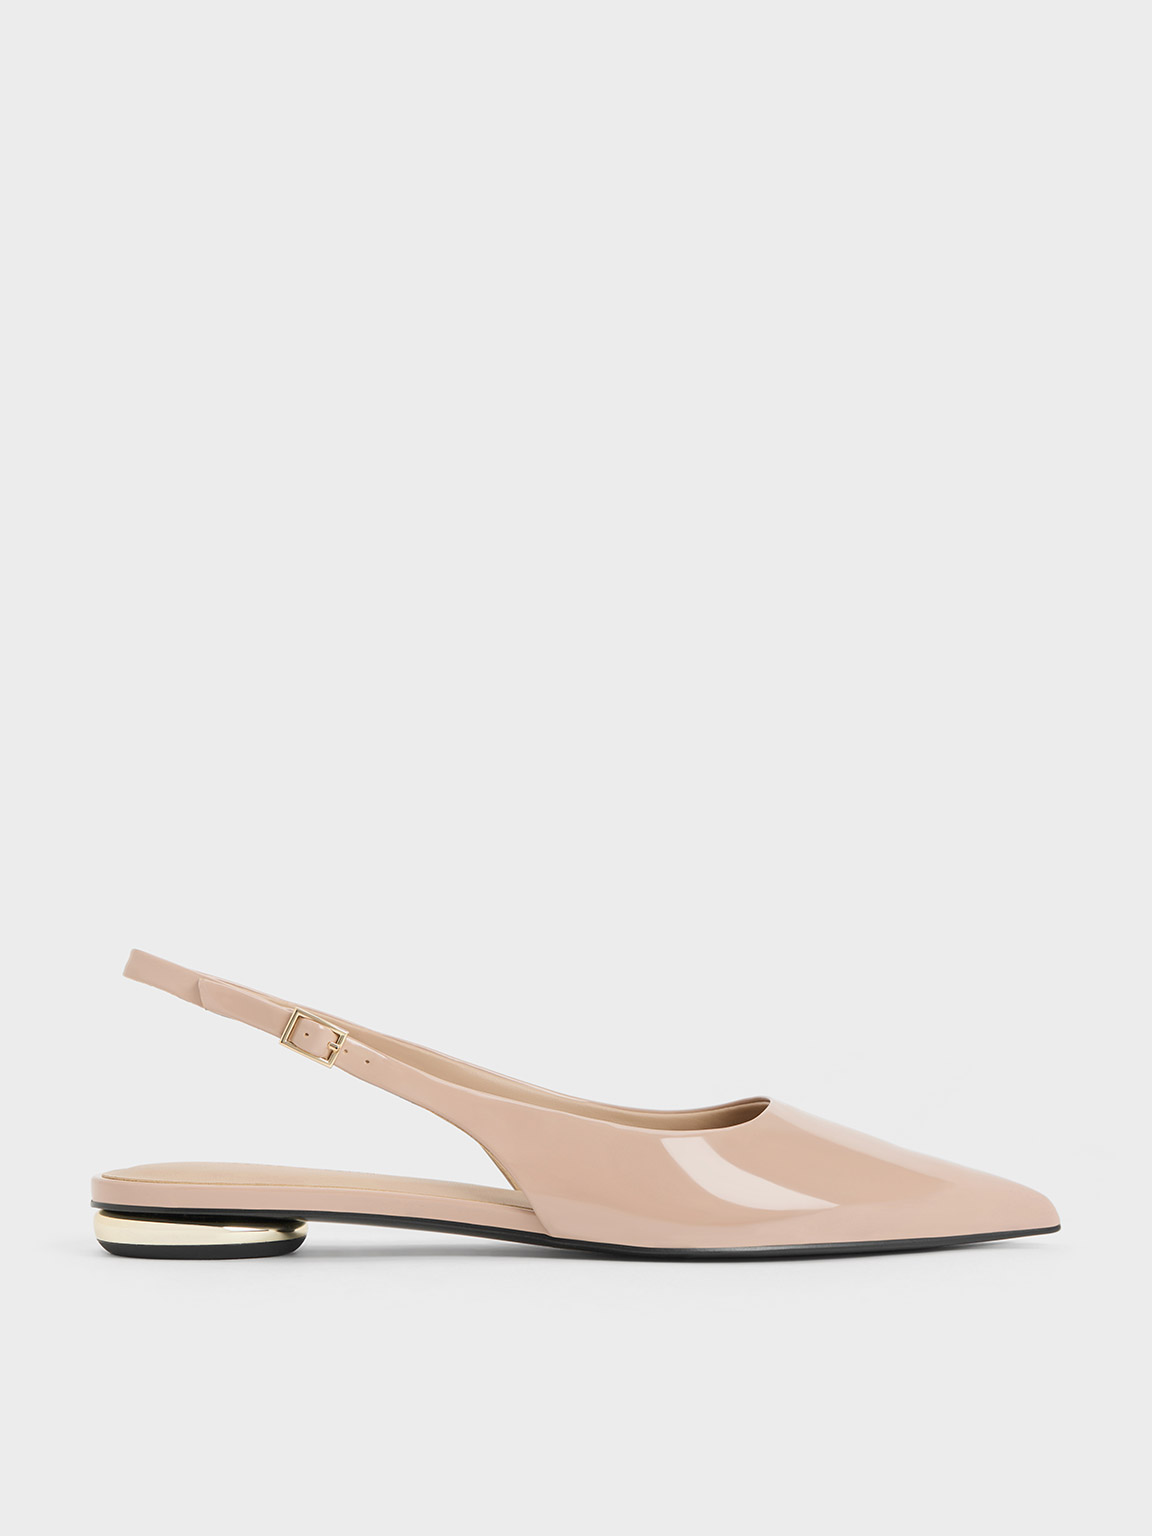 Patent Pointed-Toe Slingback Flats